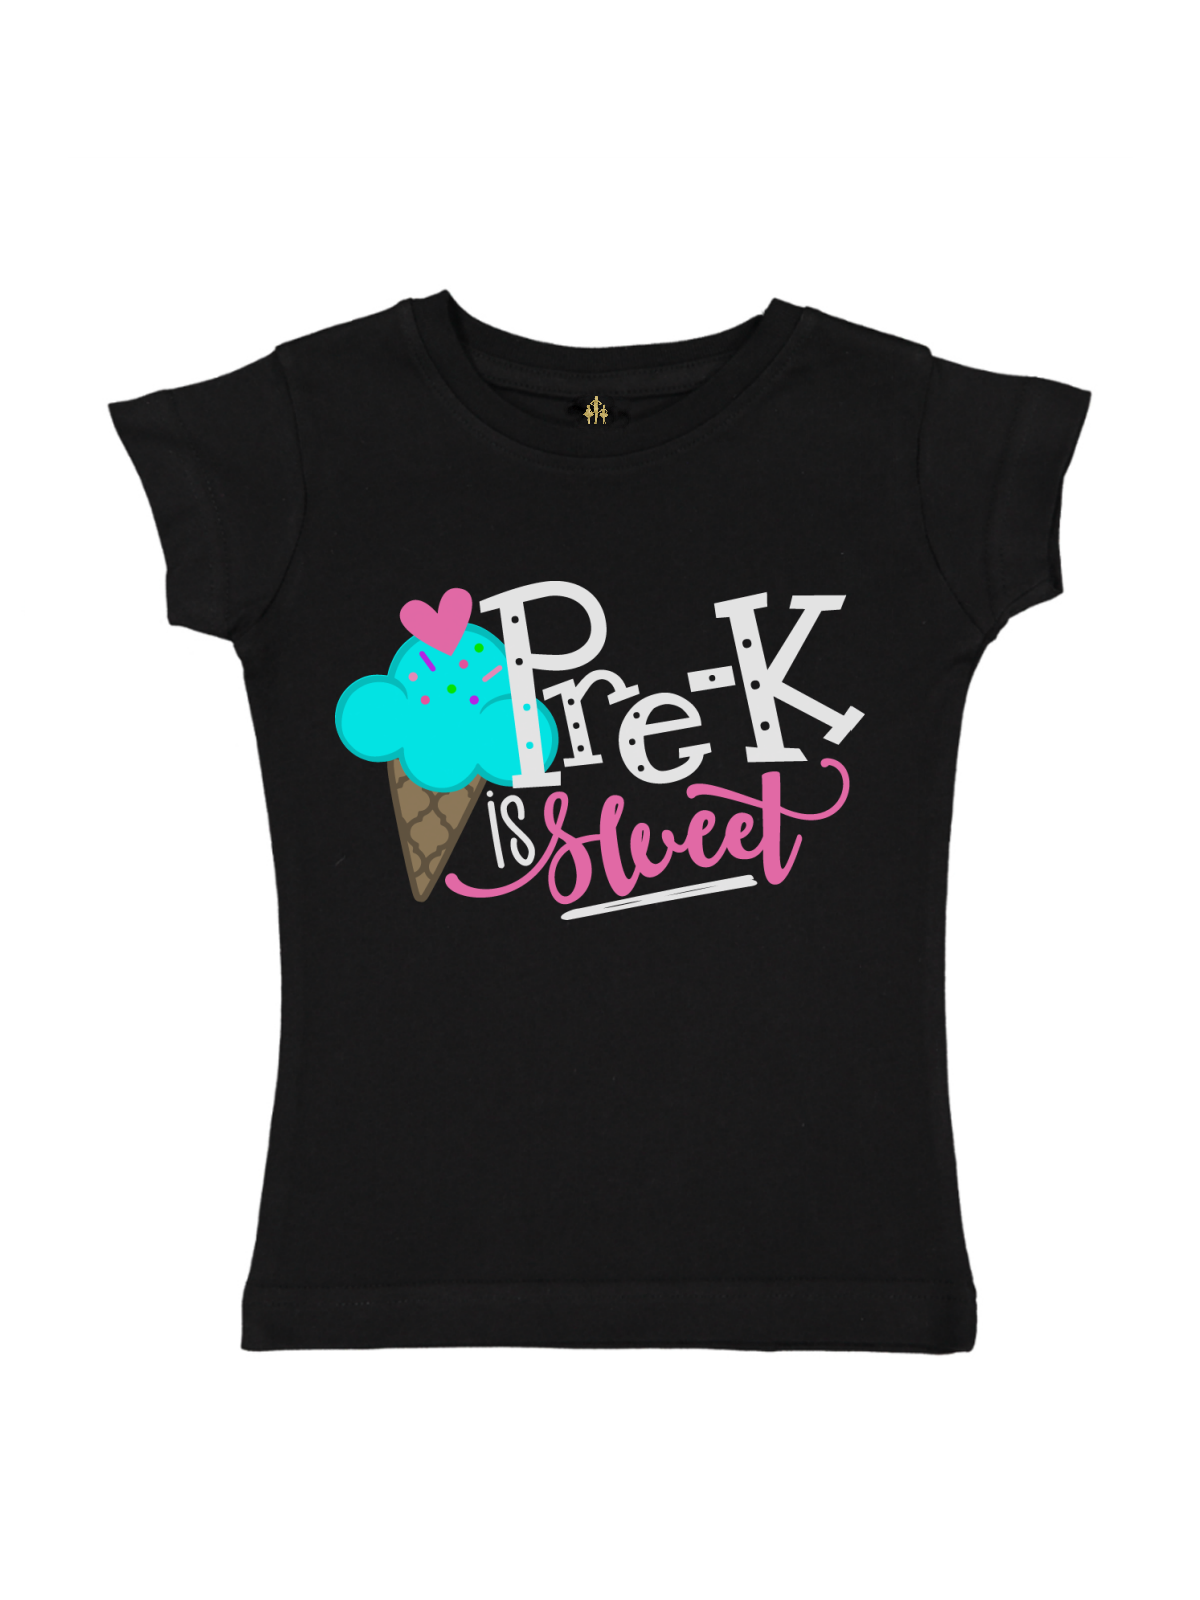 Pre-K is Sweet Girls First Day of School Shirts in White, Blue, Pink, and Black